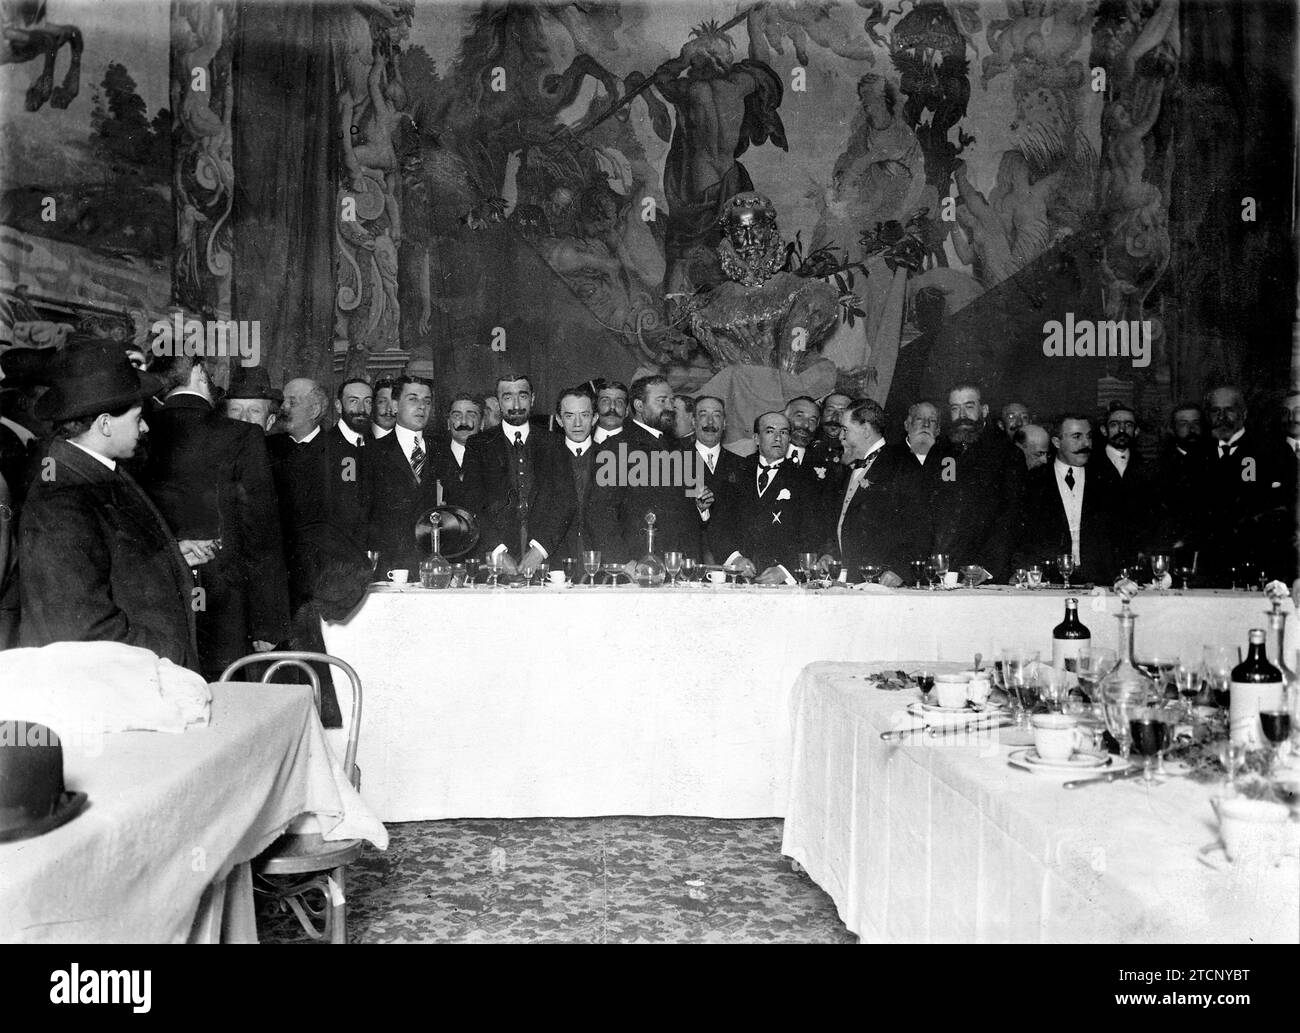 01/31/1910. Tribute to Belisario Roldan (X) in the Comedy. Presidential table of the banquet with which the illustrious Argentine speaker was presented yesterday. Credit: Album / Archivo ABC / Ramón Alba Stock Photo